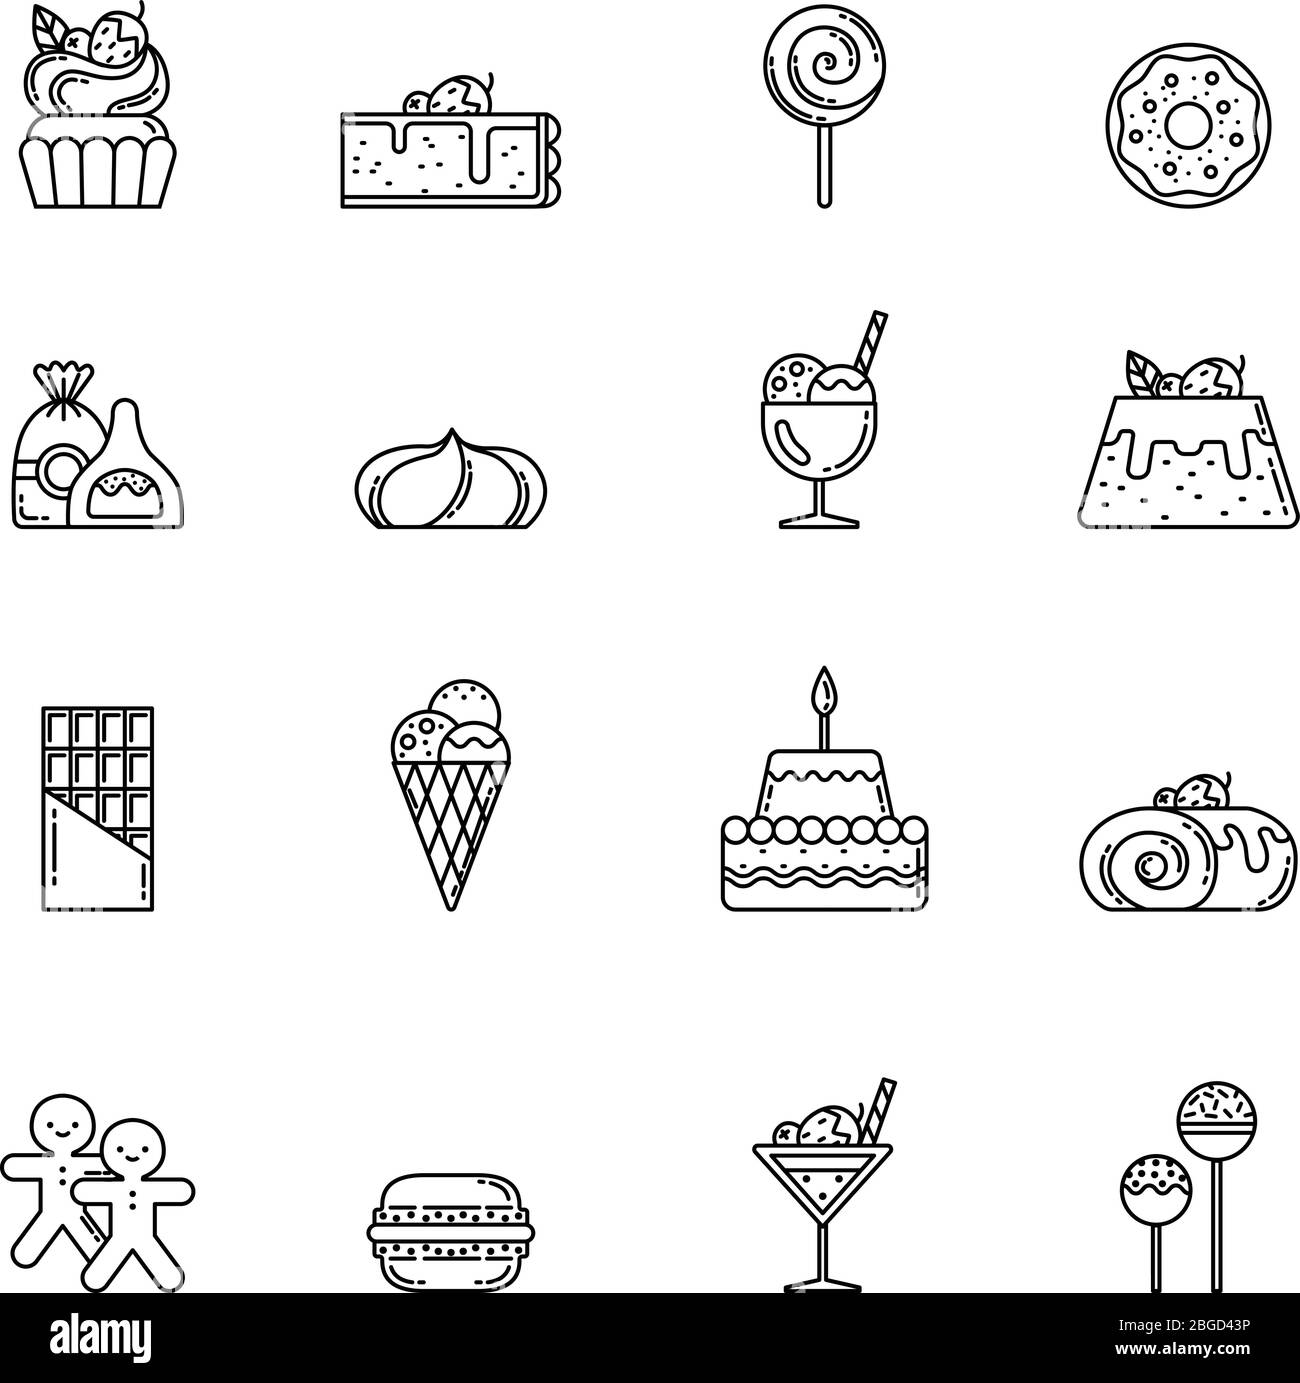 Desert vector icon set. Cupcake, sweets and other baking foods. Outline illustrations isolate on white background Stock Vector